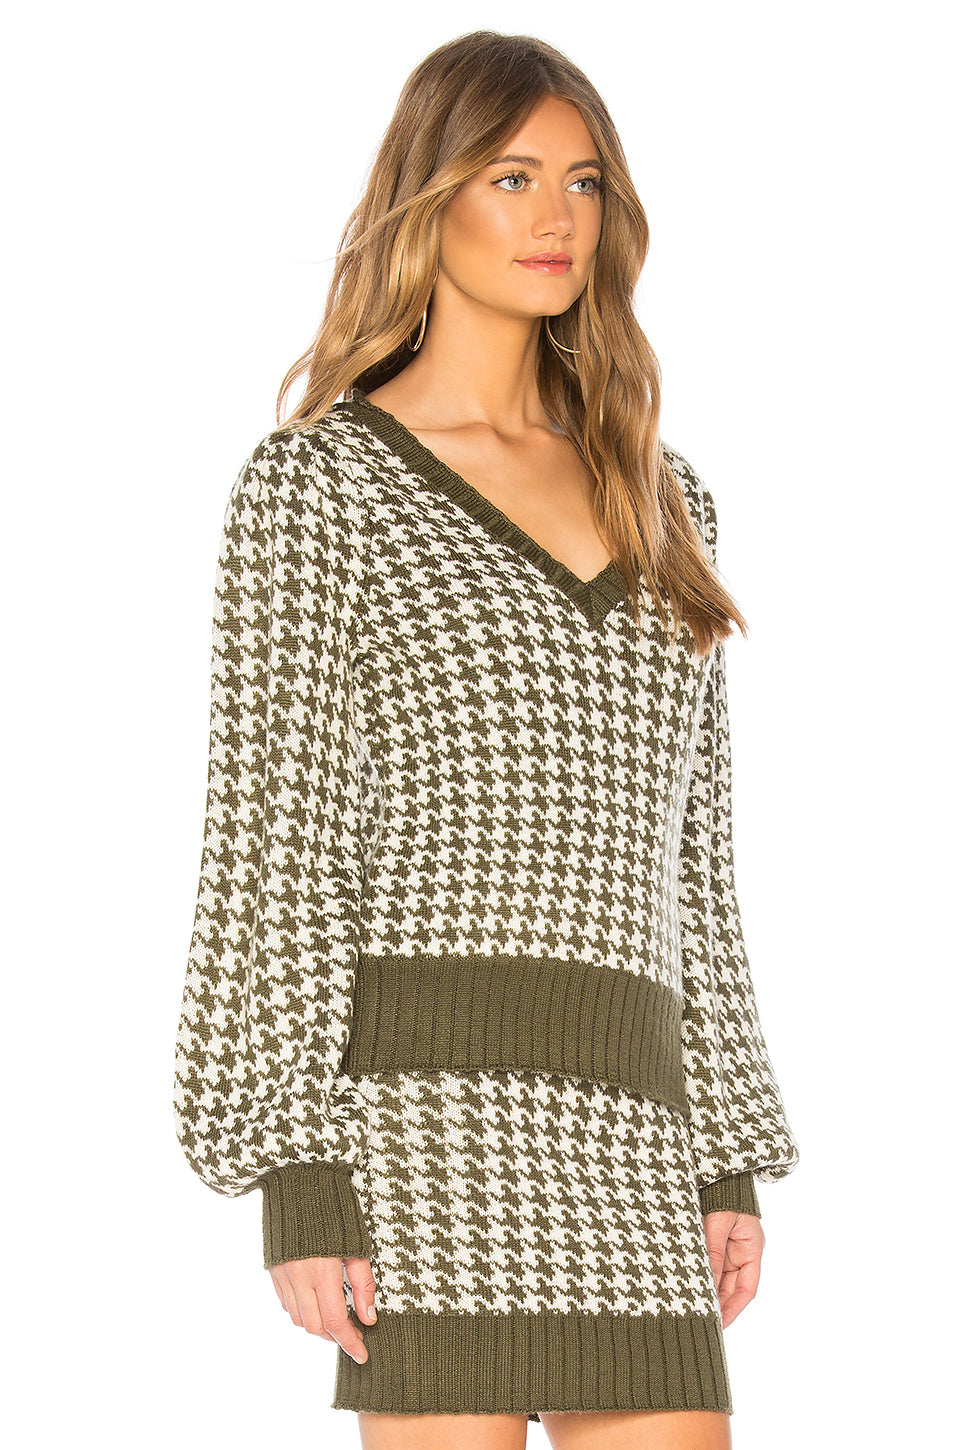 Marci Sweater in OLIVE HOUNDSTOOTH